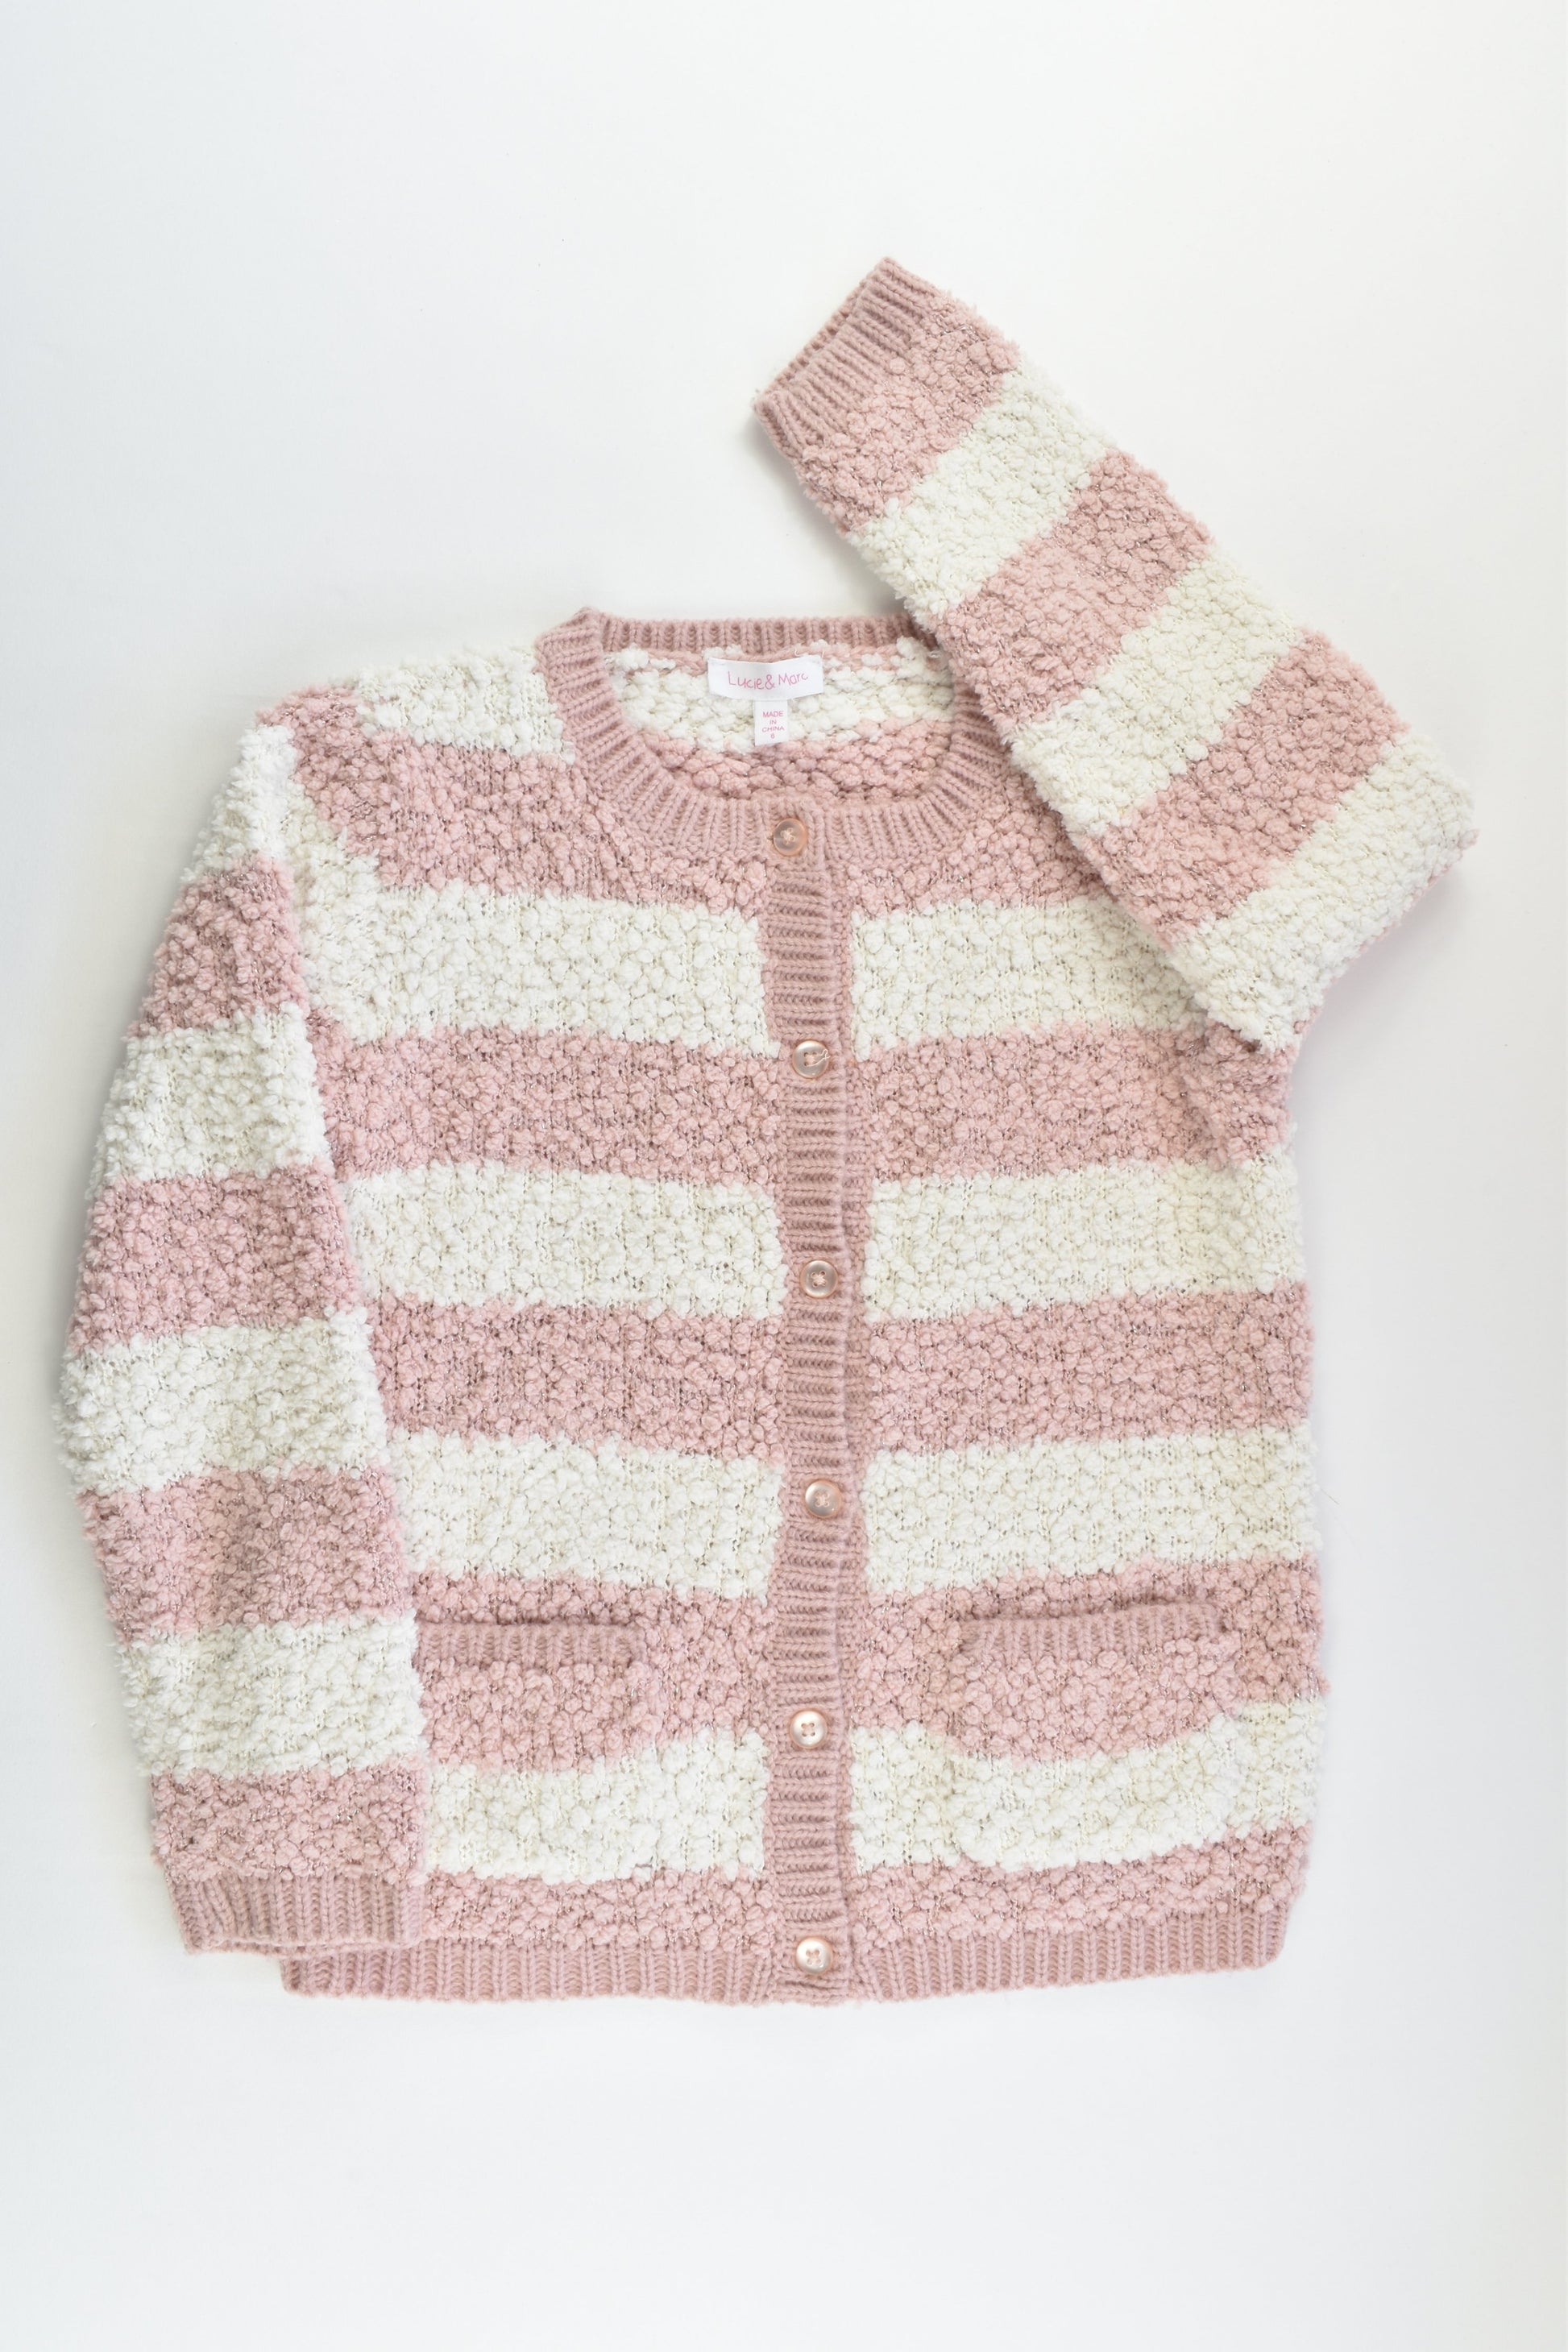 Lucie & Marc Size 6 Soft Knitted Cardigan